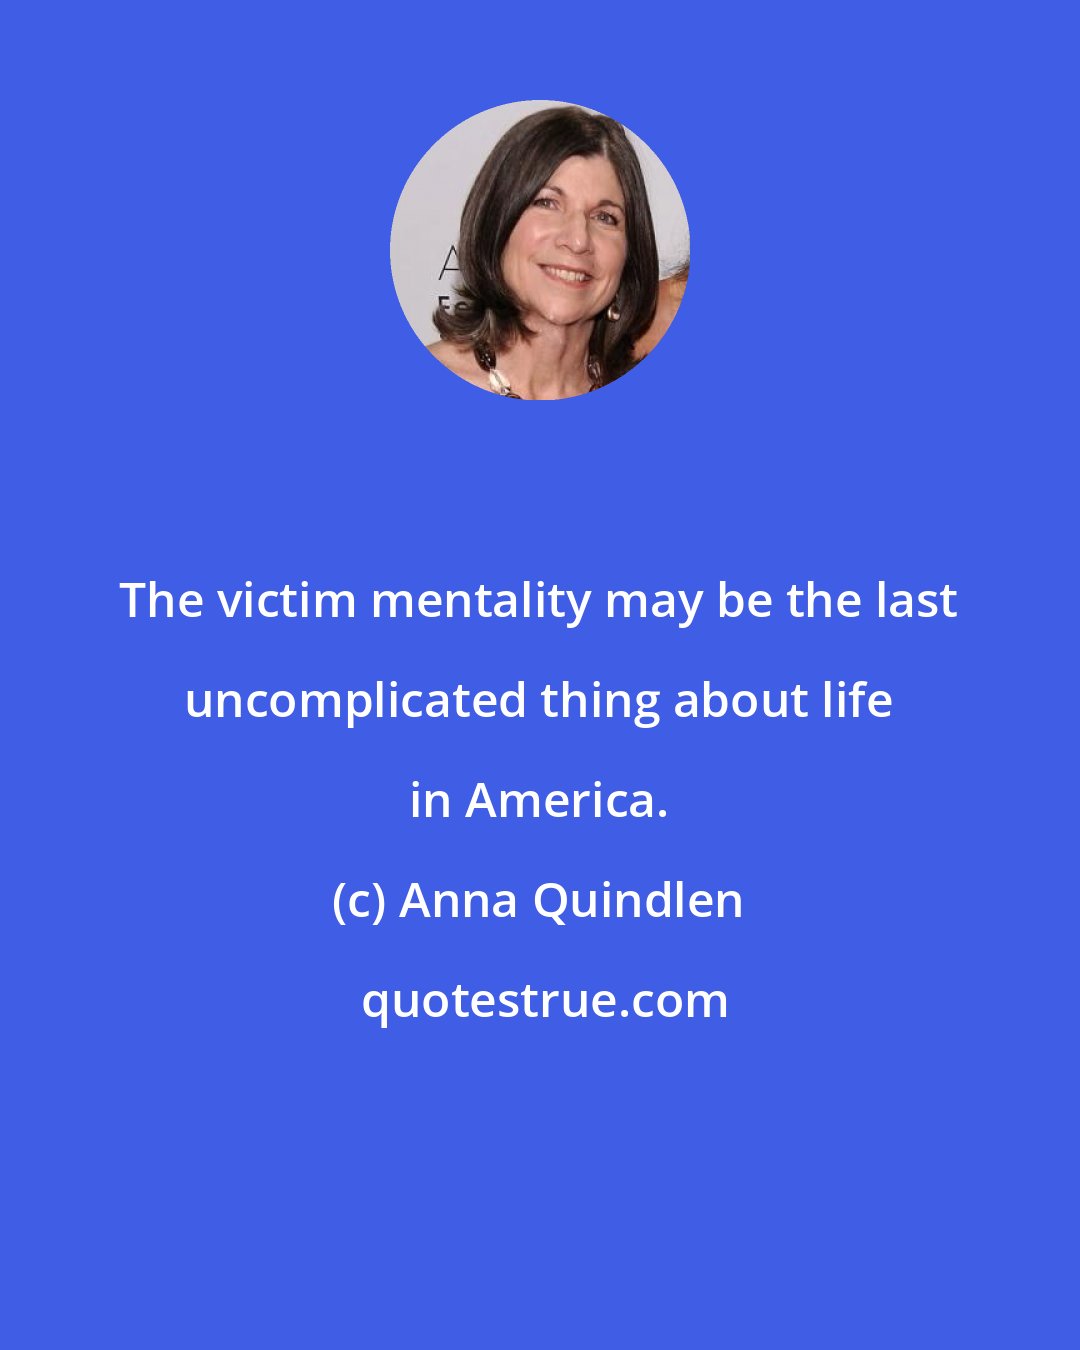 Anna Quindlen: The victim mentality may be the last uncomplicated thing about life in America.